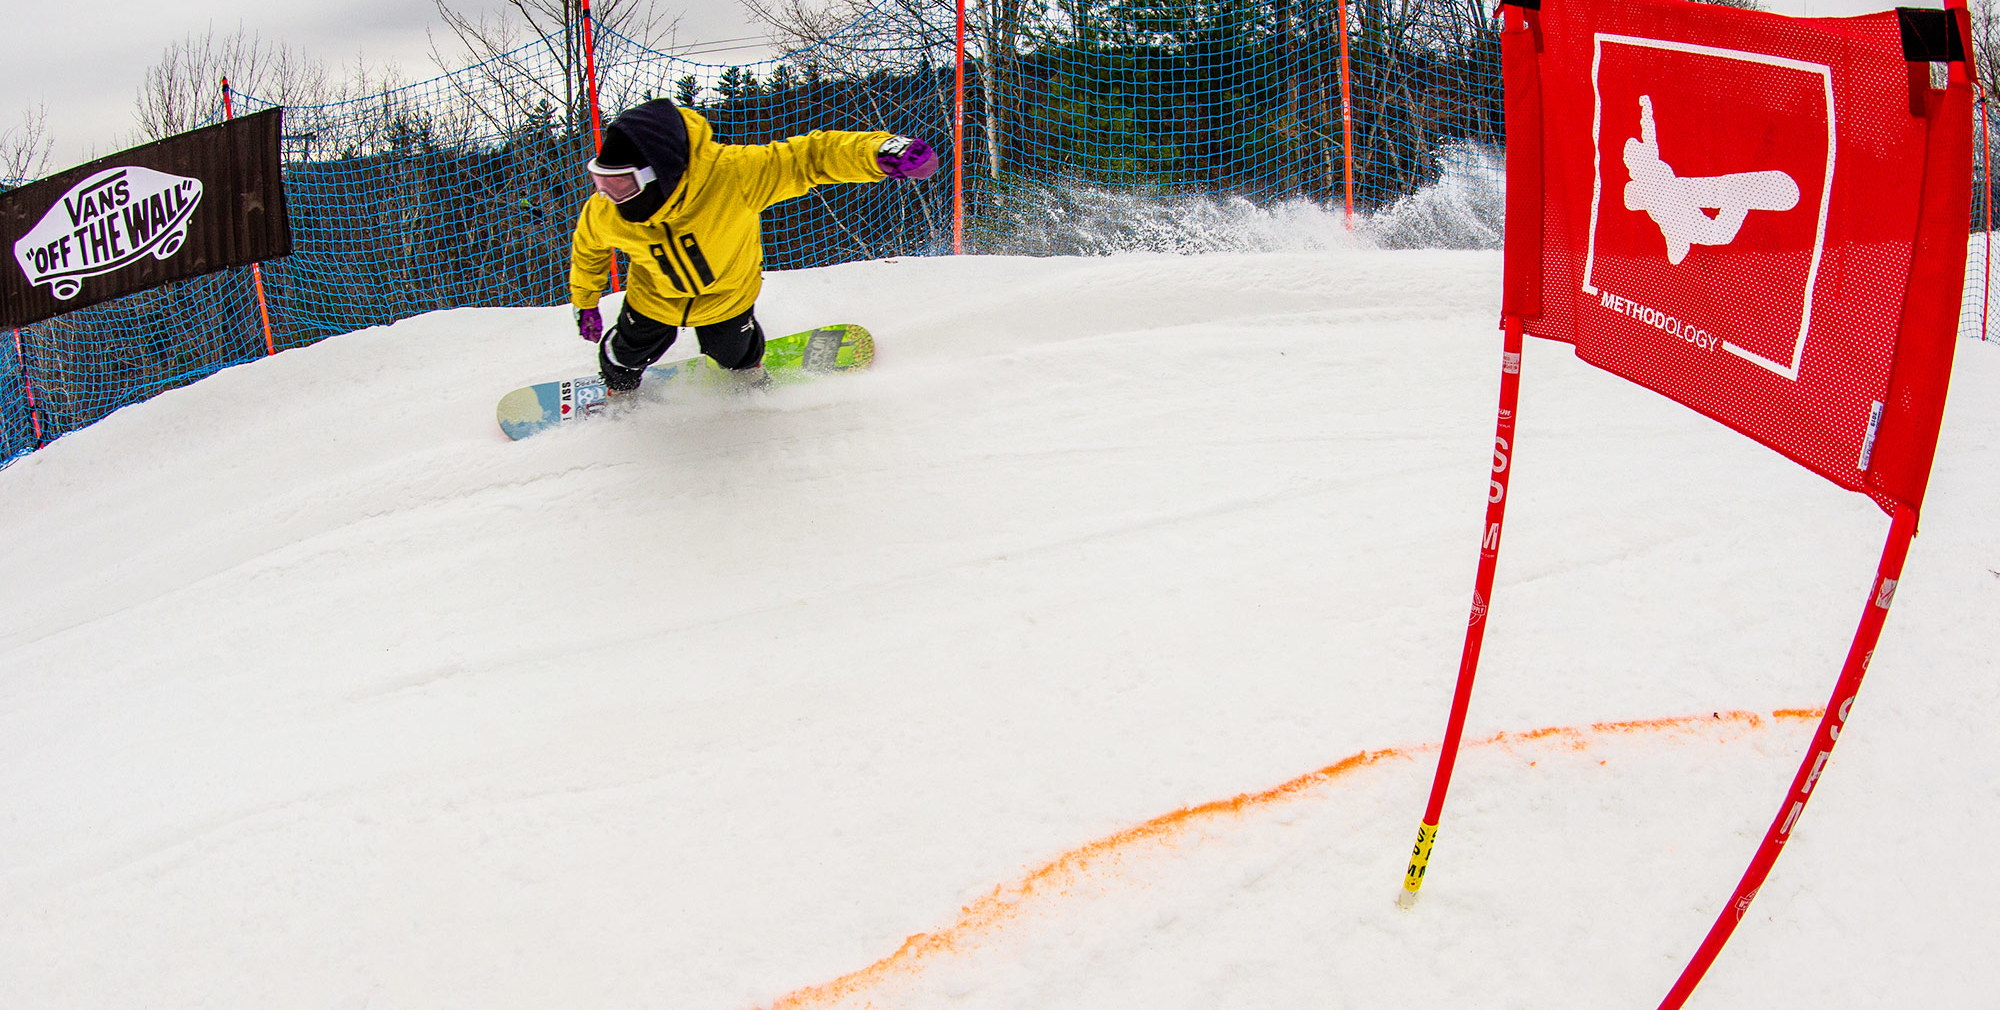 Snowboarder in race course